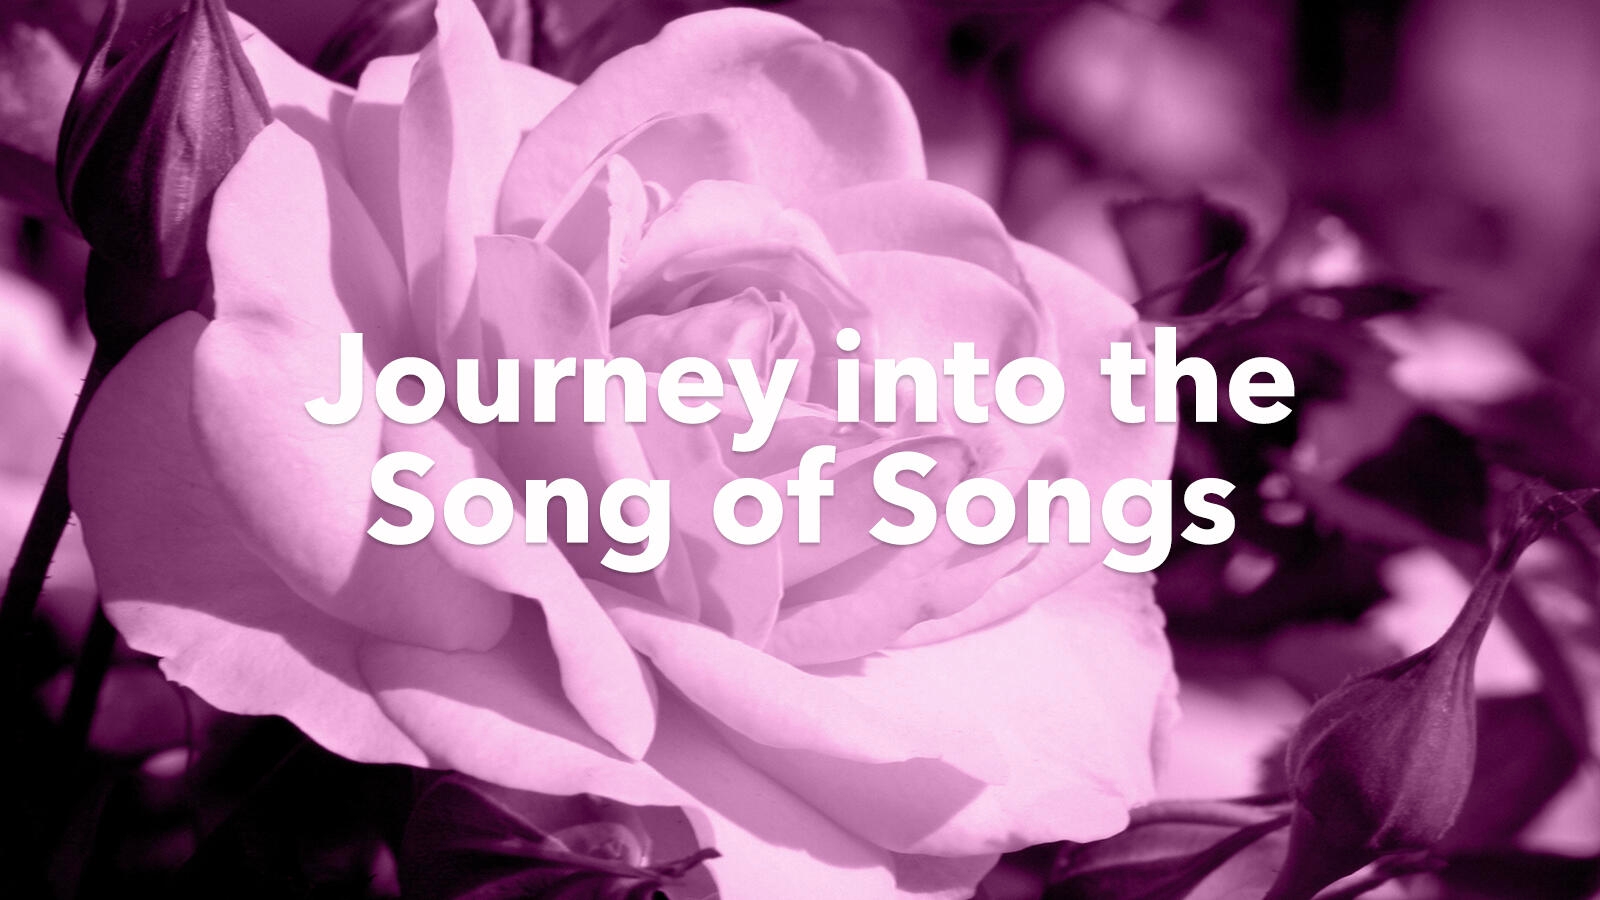 Journey into the song of songs